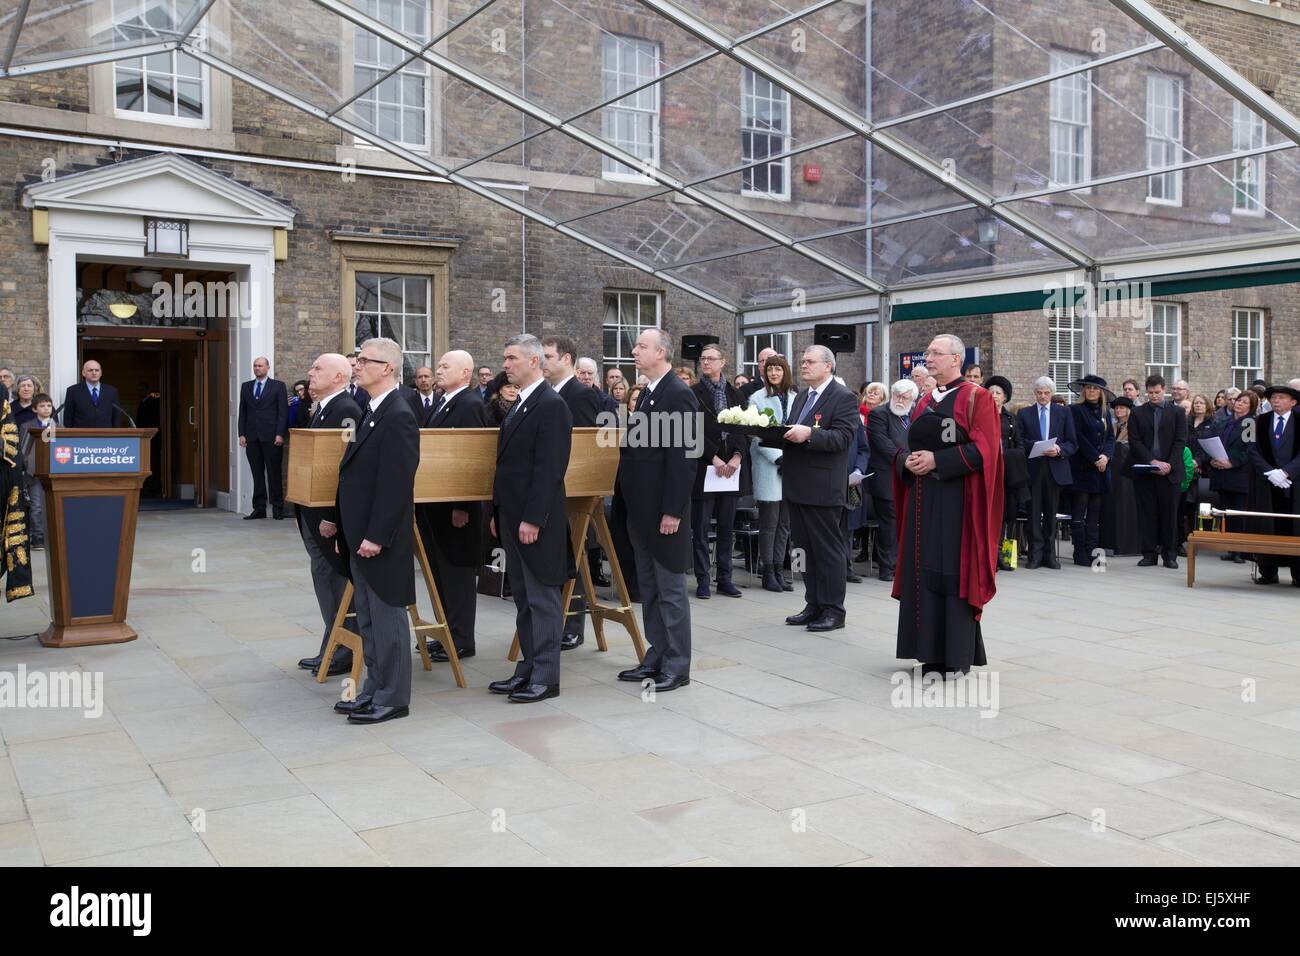 Leicester, UK. 22nd March, 2015. The departure of the mortal remains of King Richard III from the University of Leicester. Revd Canon Dr Stephen Foster, Coordinating Chaplin to the University of Leicester (front right) supervises the transferring of the coffin into the awaiting hearse. Credit:  Michael Buddle/Alamy Live News Stock Photo